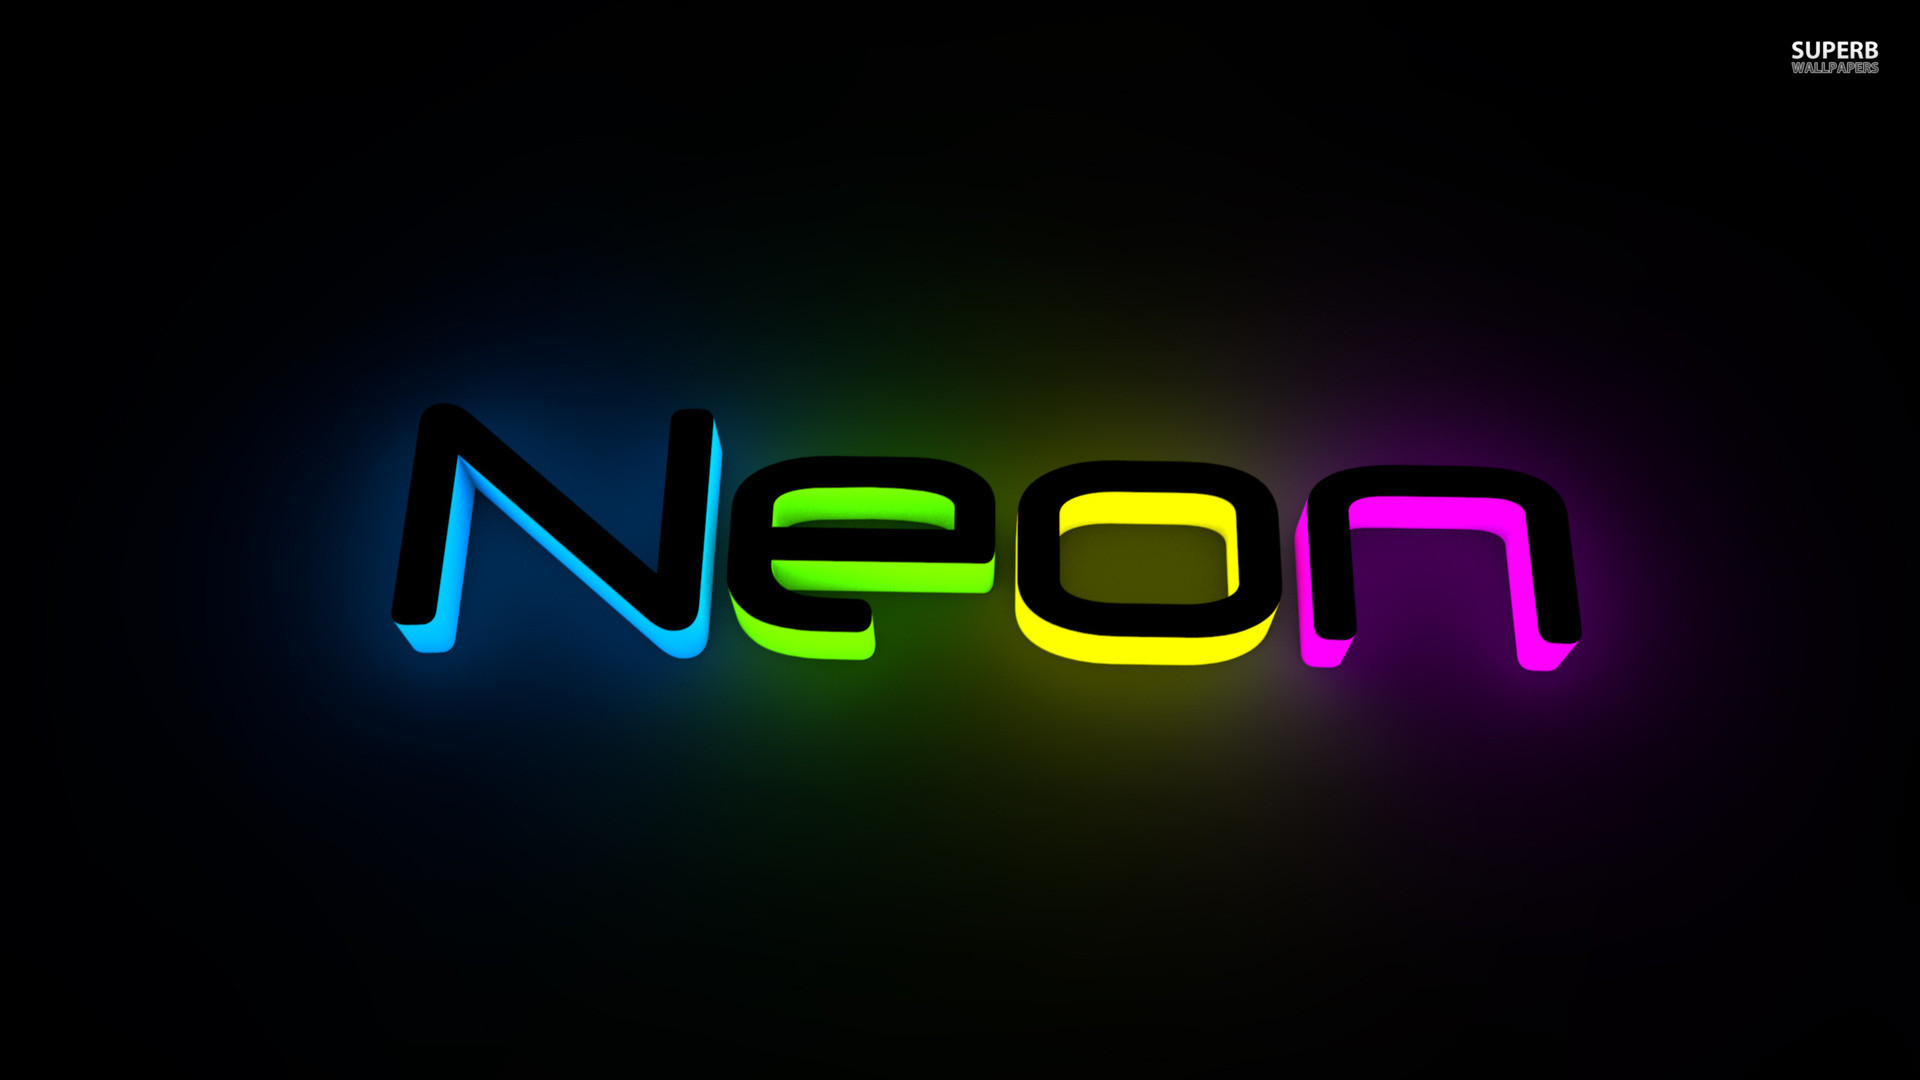 1920x1080 Wallpapers And Backgrounds: Black/Neon/White Wallpapers | Neon | Pinterest  | White wallpaper, Neon wallpaper and Wallpaper